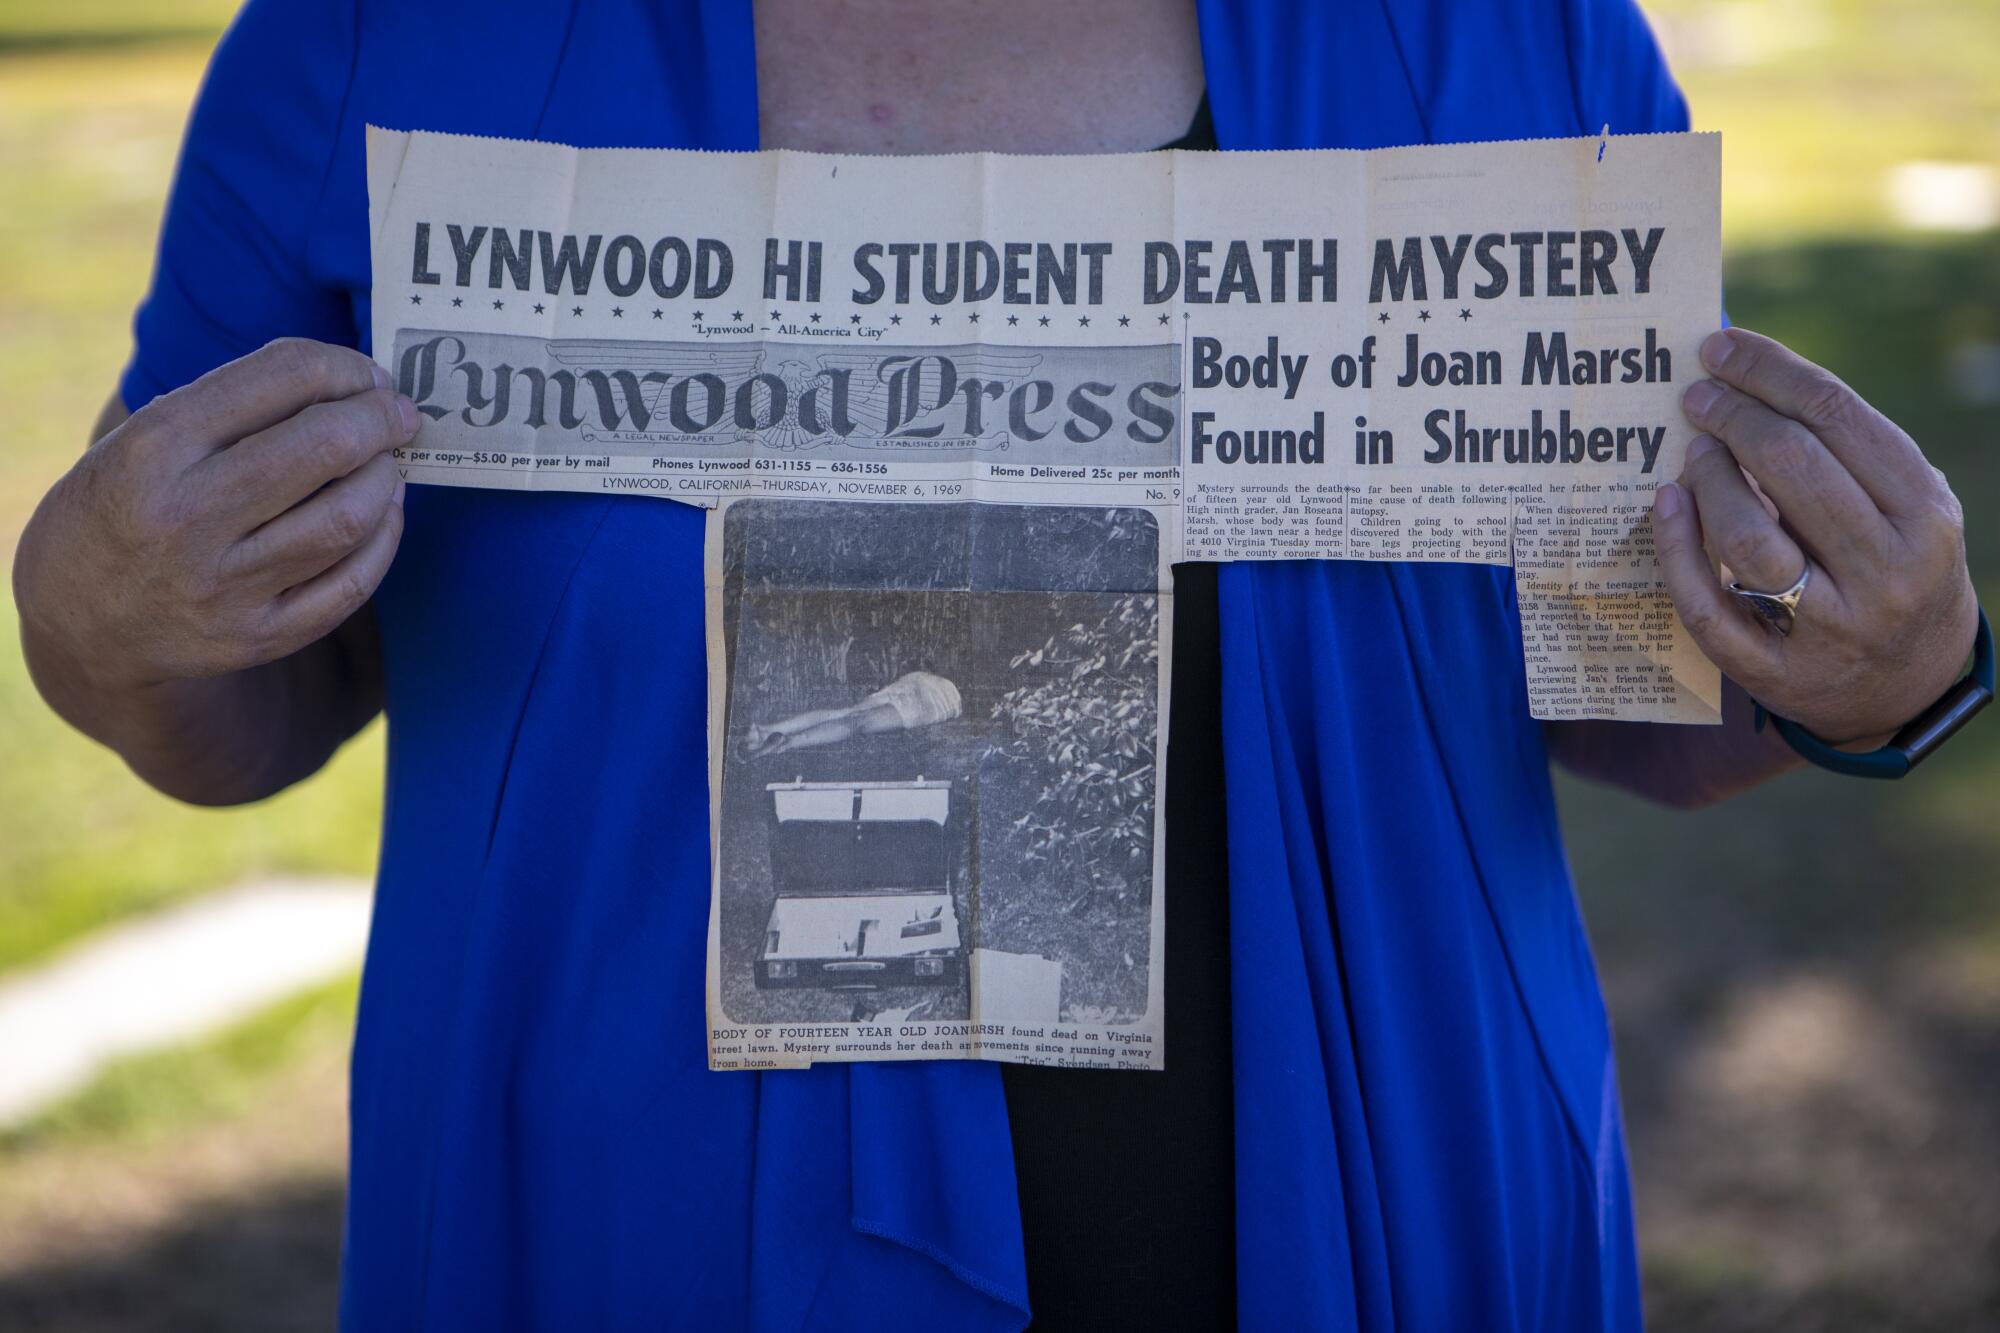 A woman holds a newspaper clipping that reads, "LYNWOOD HI STUDENT DEATH MYSTERY"